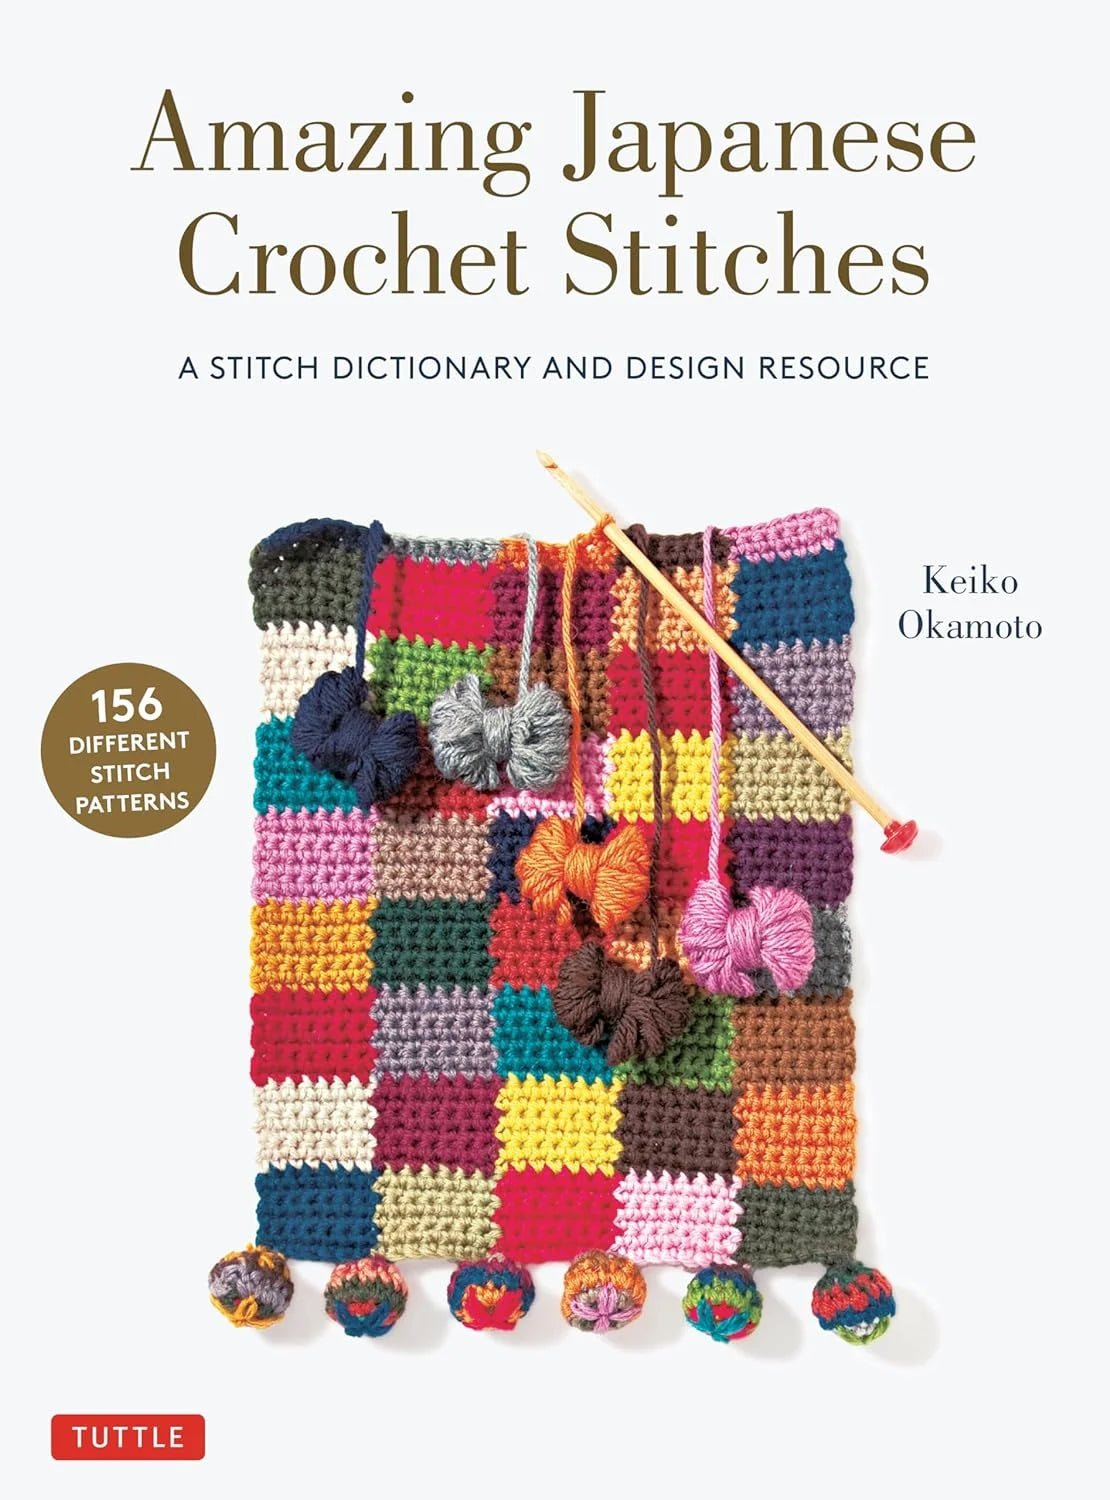 Amazing Japanese Crochet Stitches: A Stitch Dictionary and Design Resource - Keiko Okamoto - The Little Yarn Store